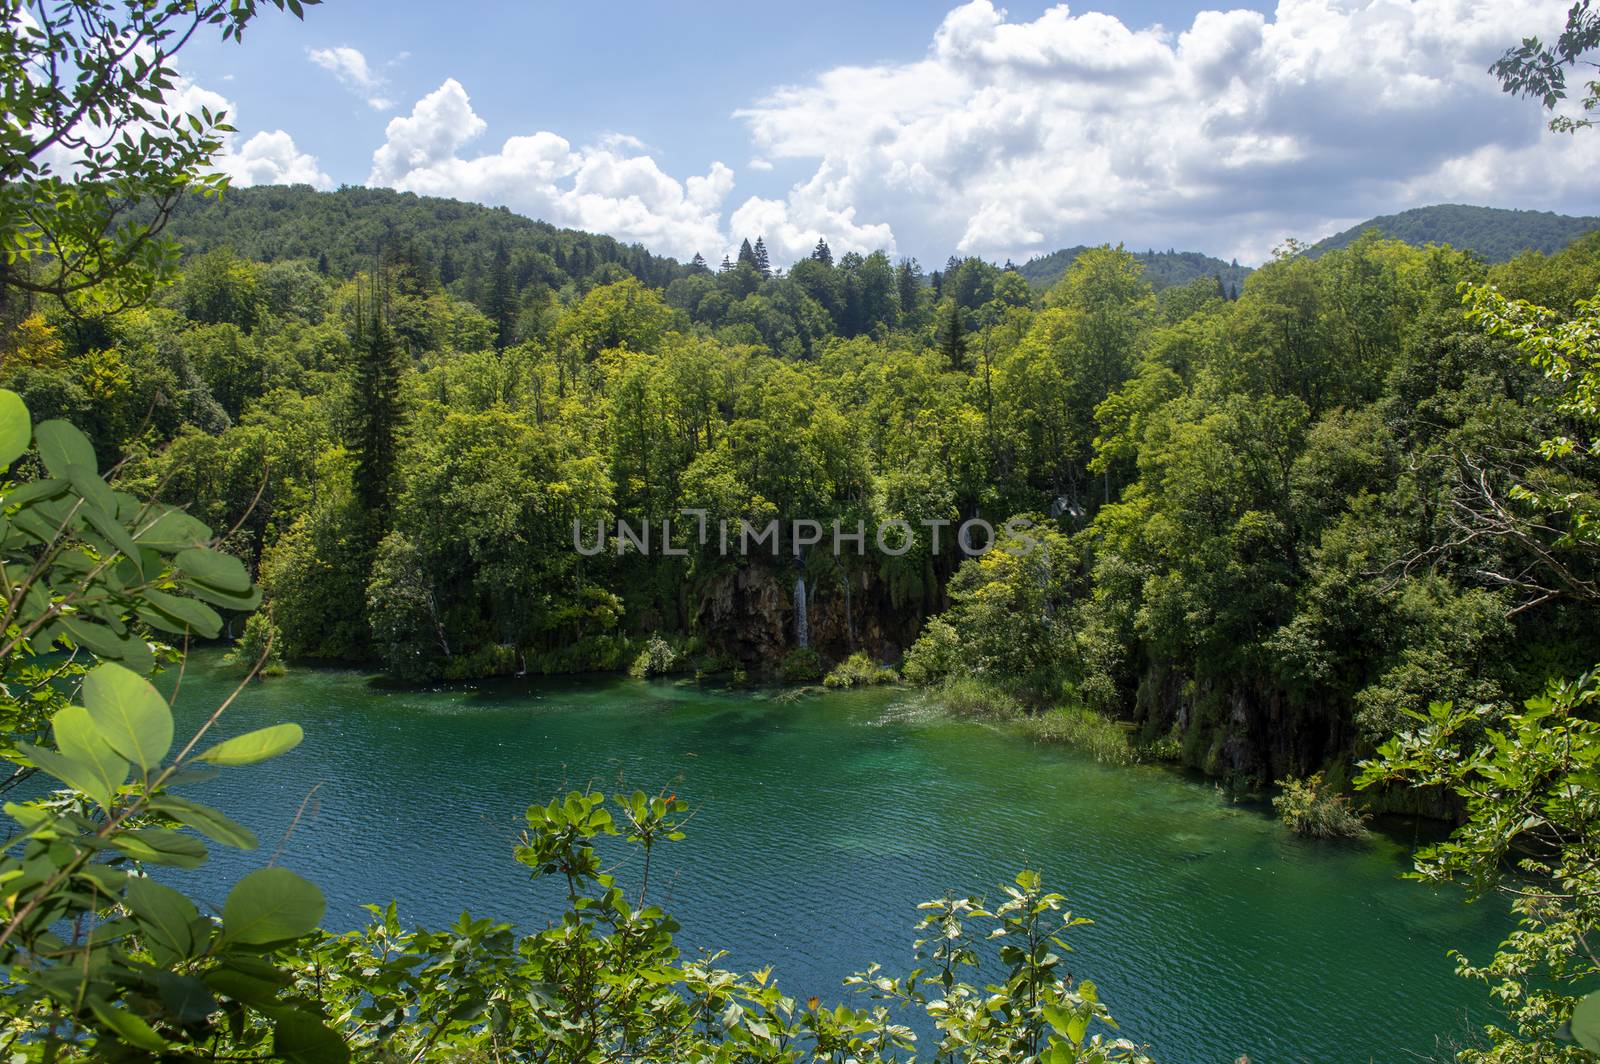 Landscape in Plitvice with green trees, a blue lake and a blue sky with clouds on a sunny day.